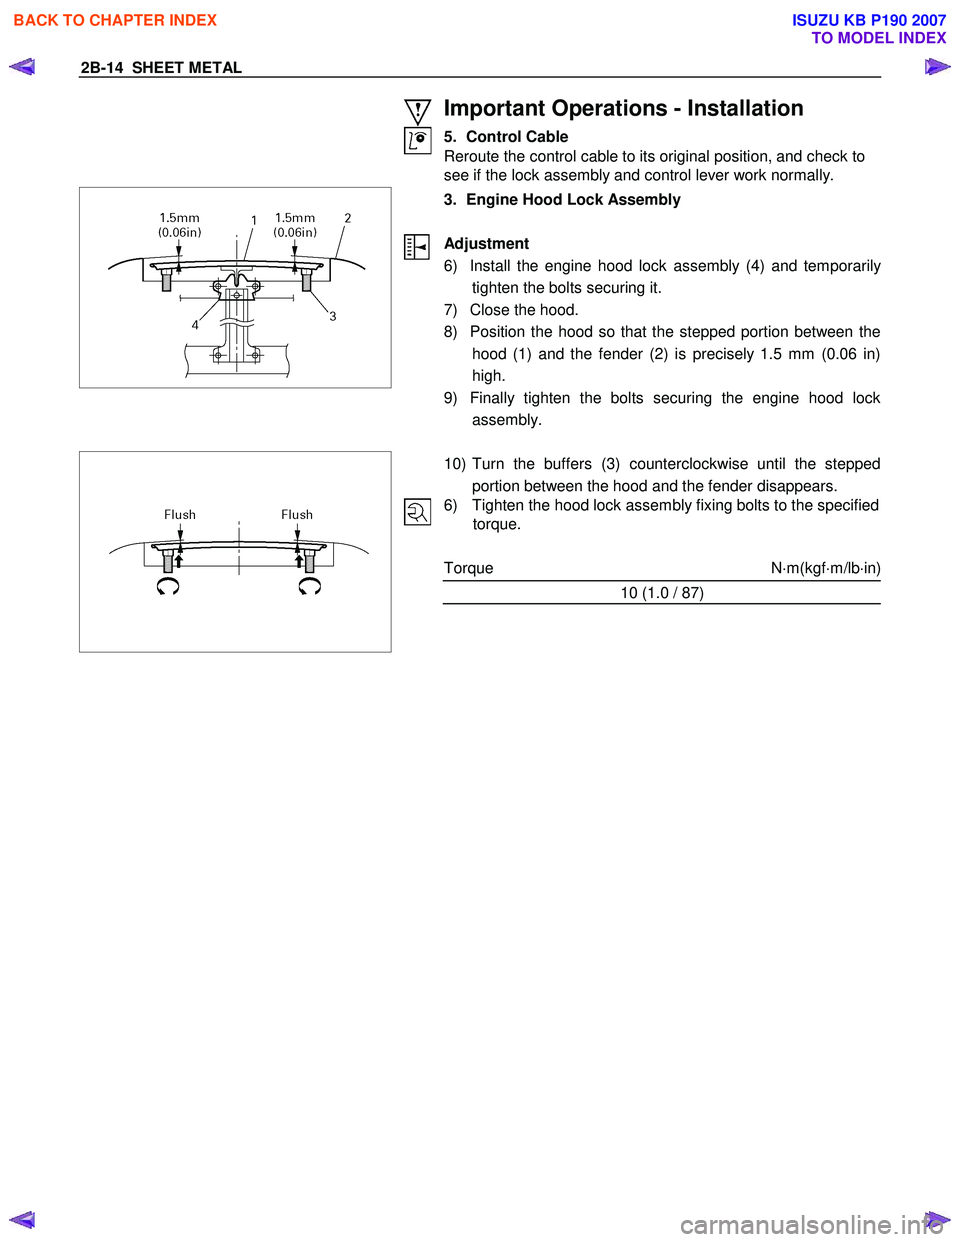 ISUZU KB P190 2007  Workshop Repair Manual 2B-14  SHEET METAL 
 
 
Important Operations - Installation 
5. Control Cable 
Reroute the control cable to its original position, and check to  
see if the lock assembly and control lever work normal